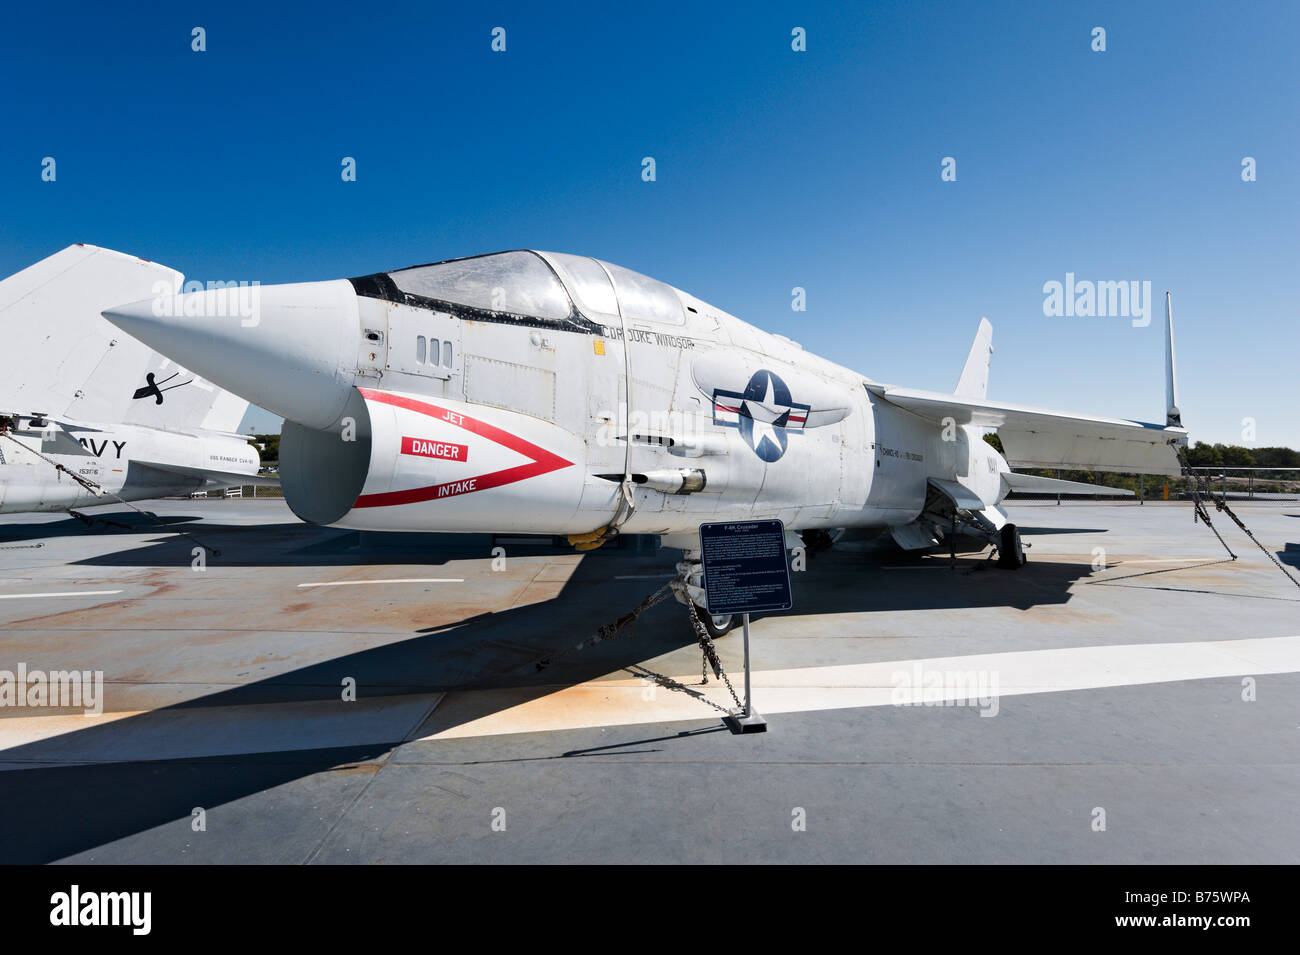 F-8K Crusader fighter aircraft on deck of USS Yorktown aircraft carrier, Patriots Point Naval Museum, Charleston, South Carolina Stock Photo